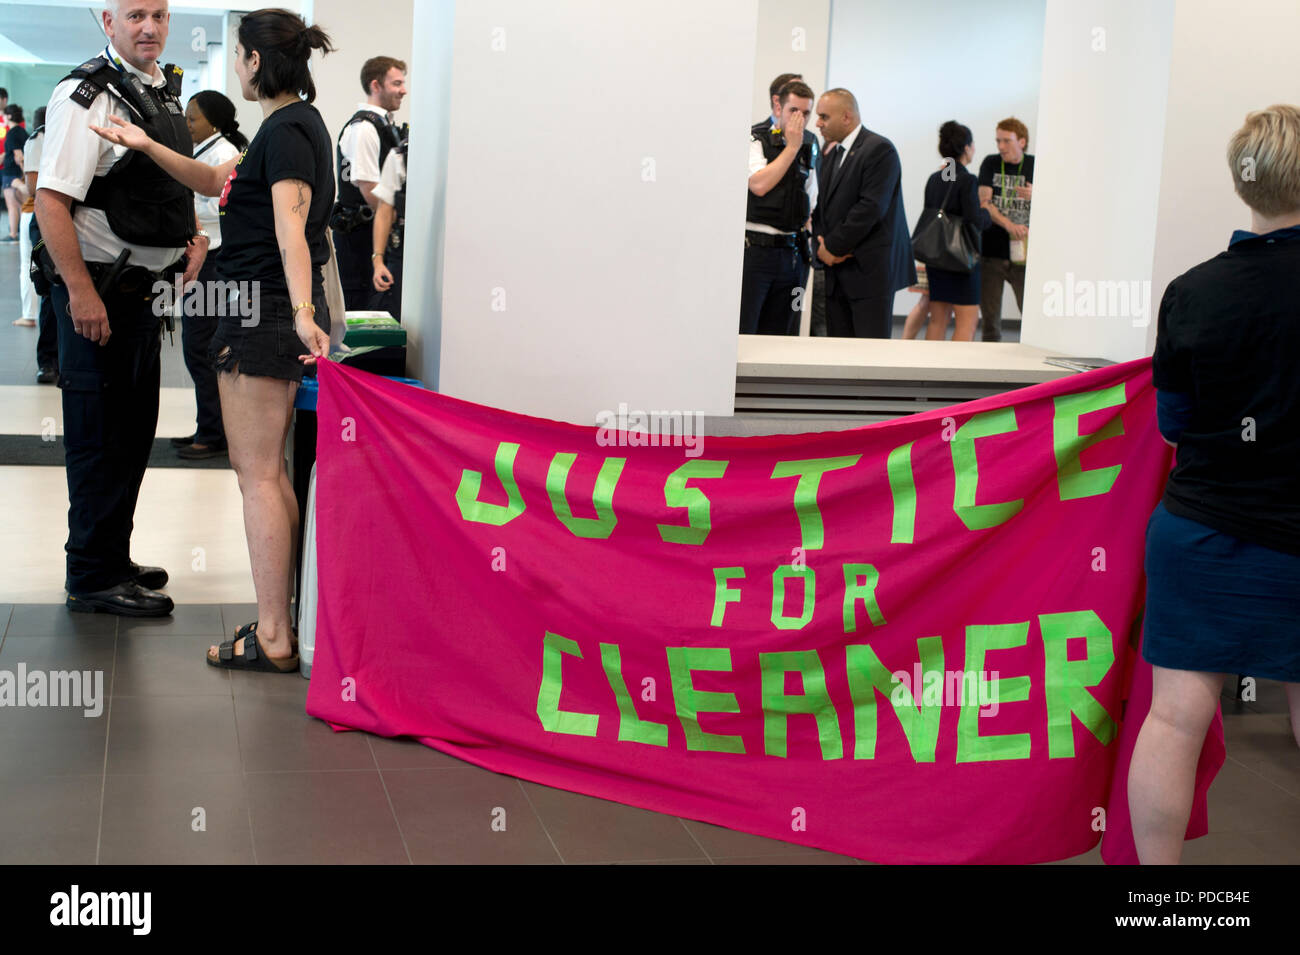 London, UK. 8th August, 2018. Ministry of Justice, Petty France, London. Cleaners from the United Voices of the World Union strike for three days demanding they be paid the London Living Wage of £10.20 an hour instead of the minimum wage of £7.83 that they currently get. Cleaners and their supporters occupied the Ministry for over an hour until a meeting was arranged with a Minister's representative, a meeting they have been requesting since December 2017. Credit: Jenny Matthews/Alamy Live News Stock Photo